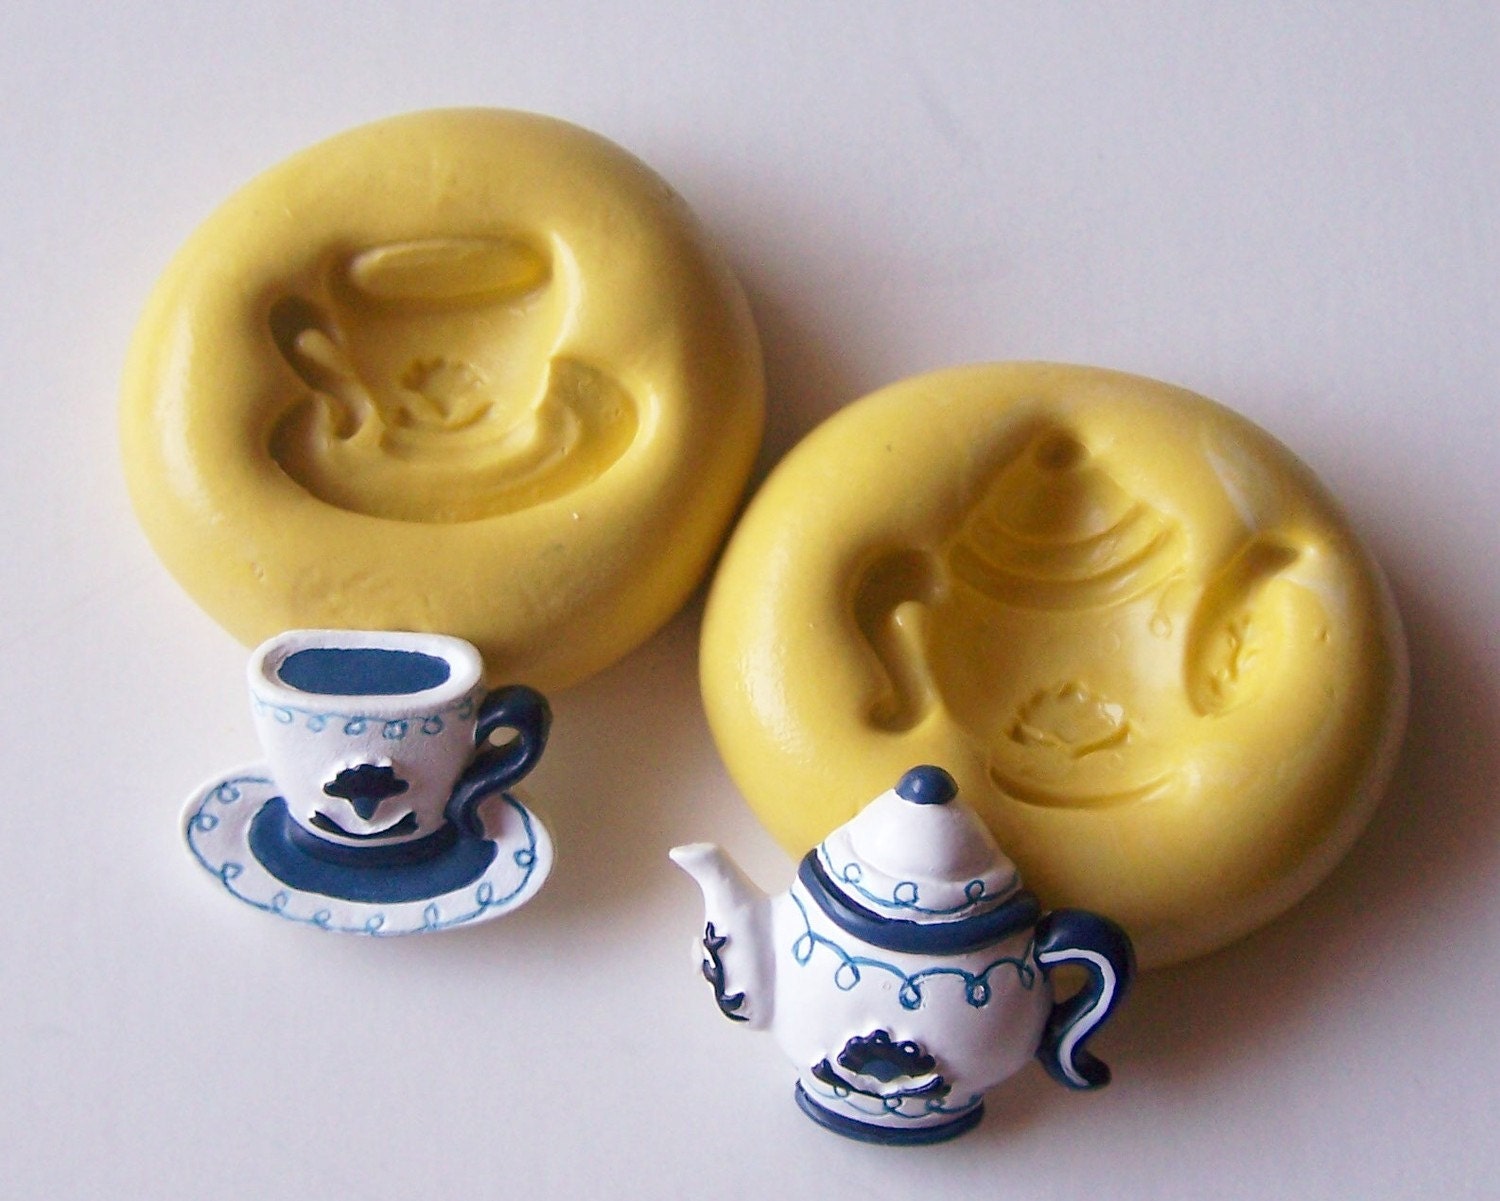 Teapot cup 107 - silicone flexible mold, craft mold, porcelain mold, jewelry mold, food mold, pop up mold, clays mold. - Minimolds